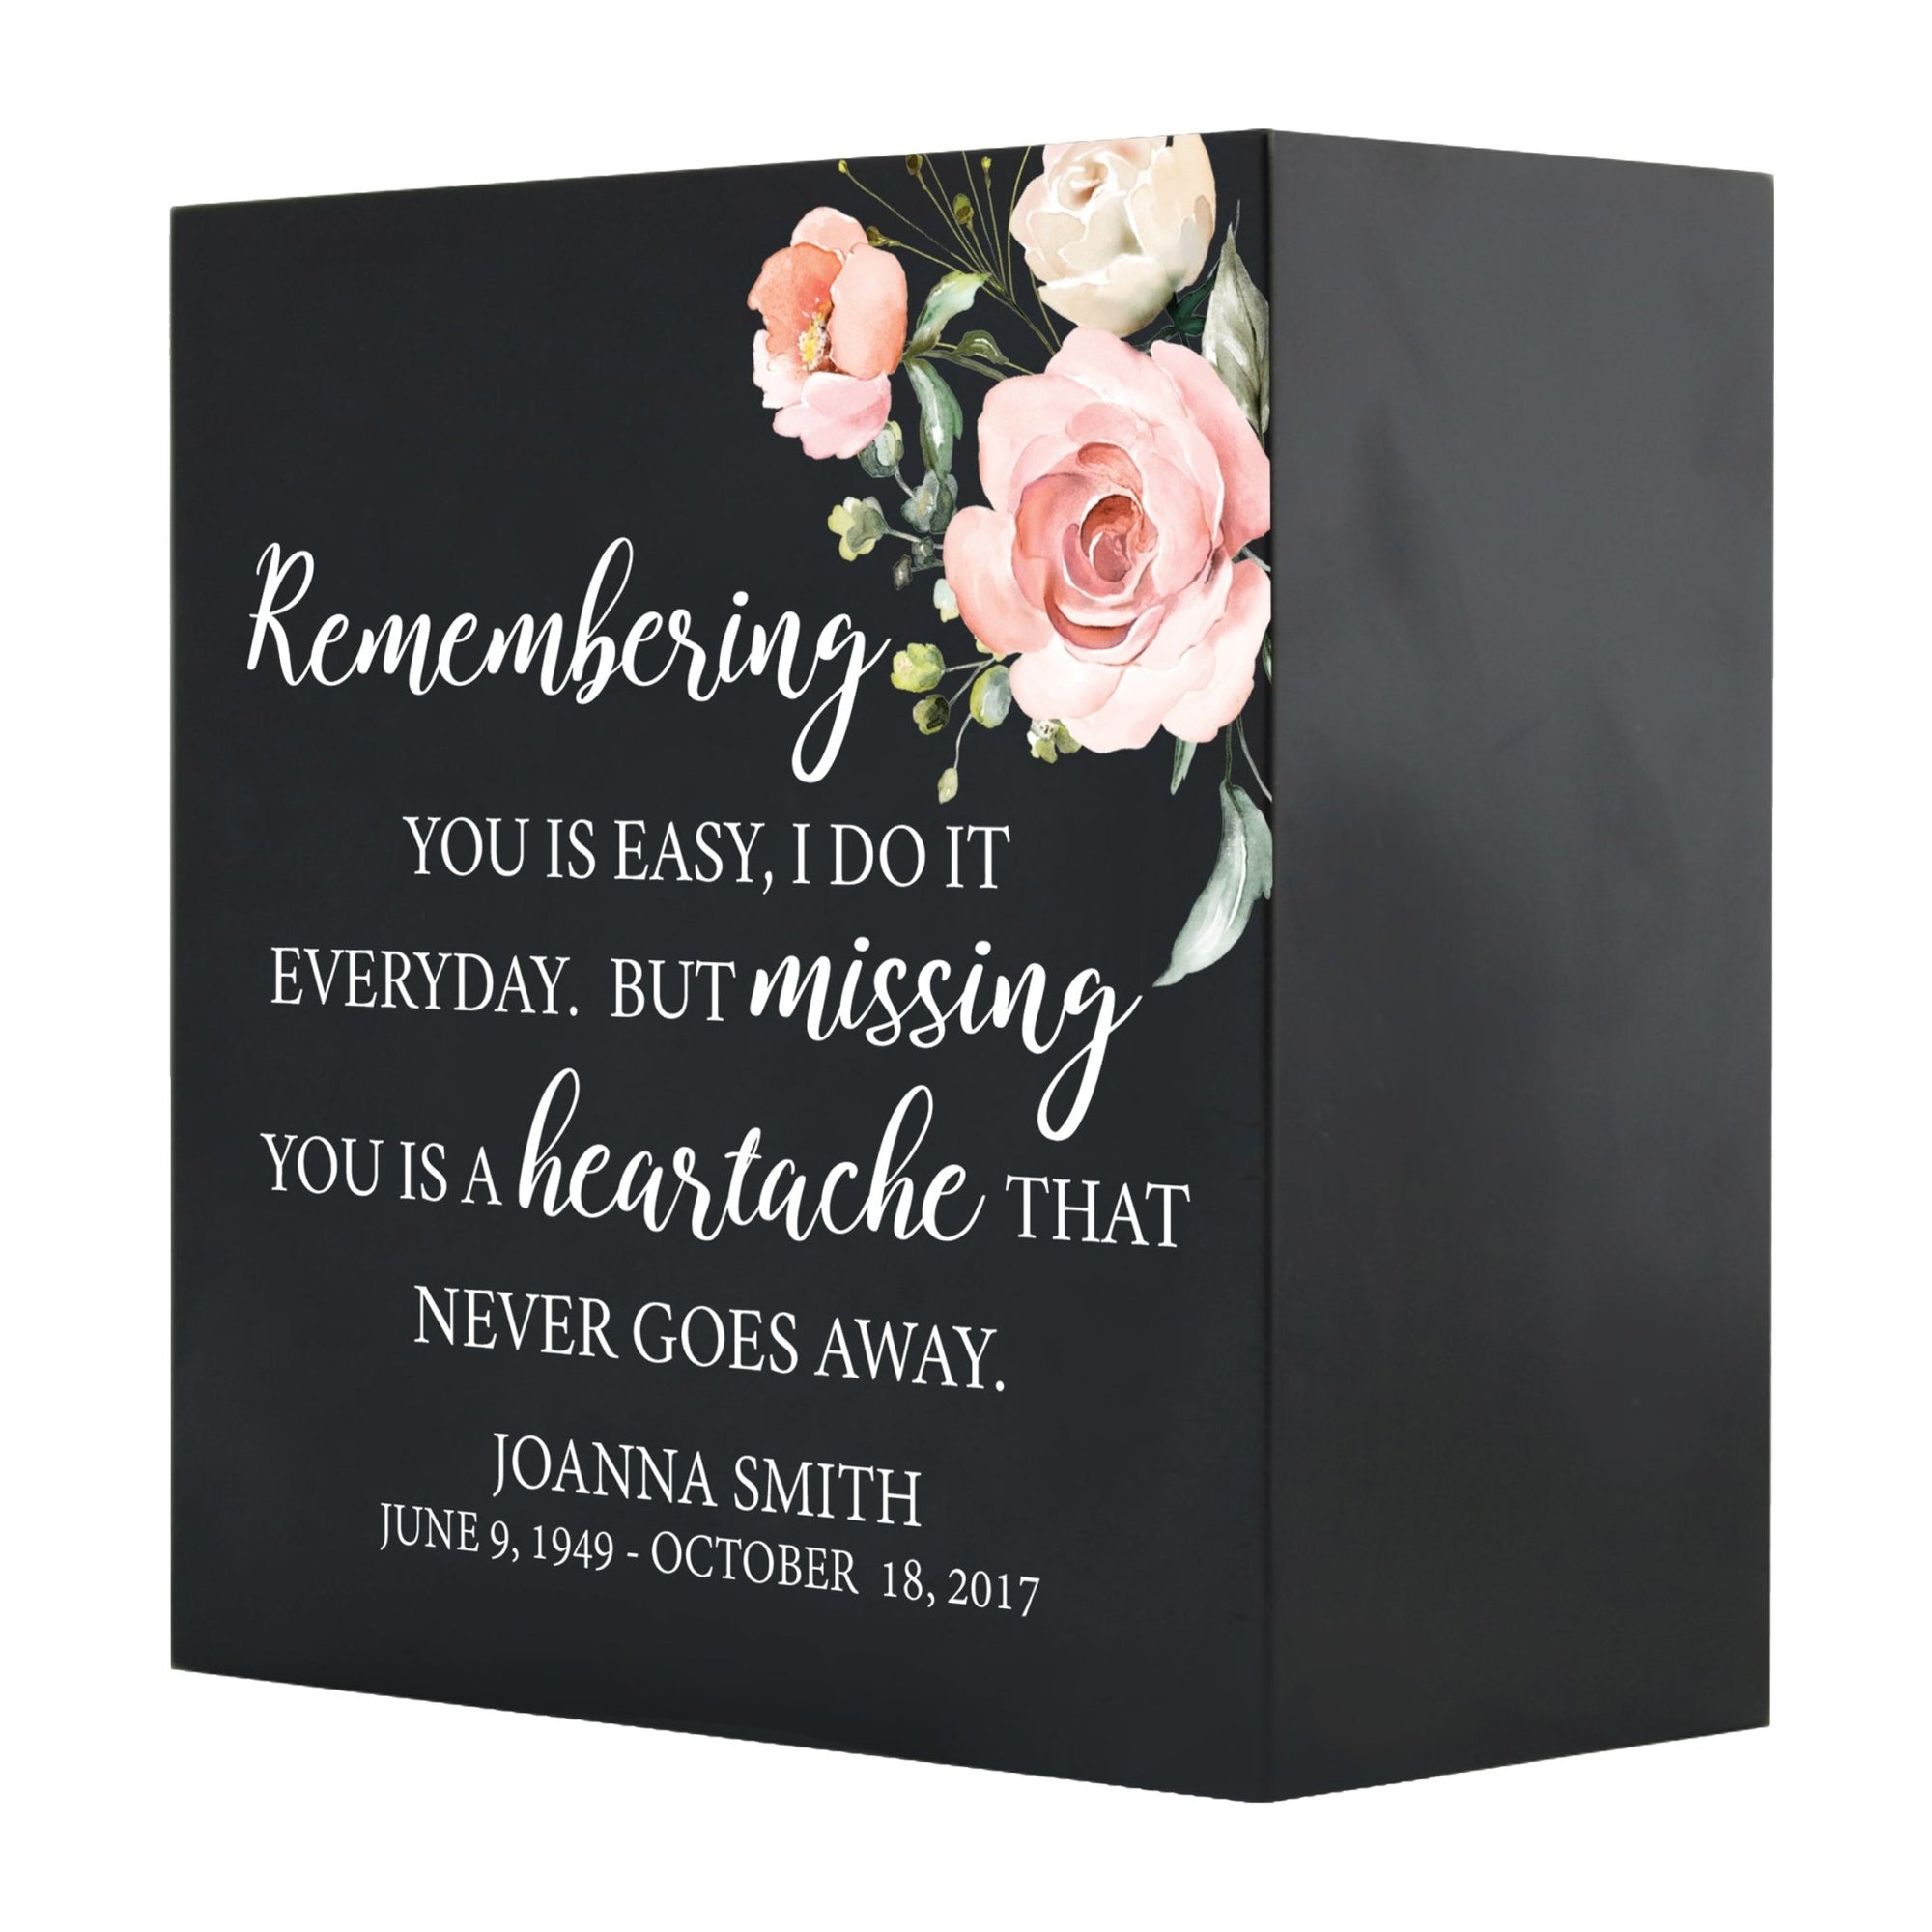 Personalized Modern Inspirational Memorial Wooden Shadow Box and Urn 6x6 holds 53 cu in of Human Ashes - Remembering You Is Easy (Missing) - LifeSong Milestones